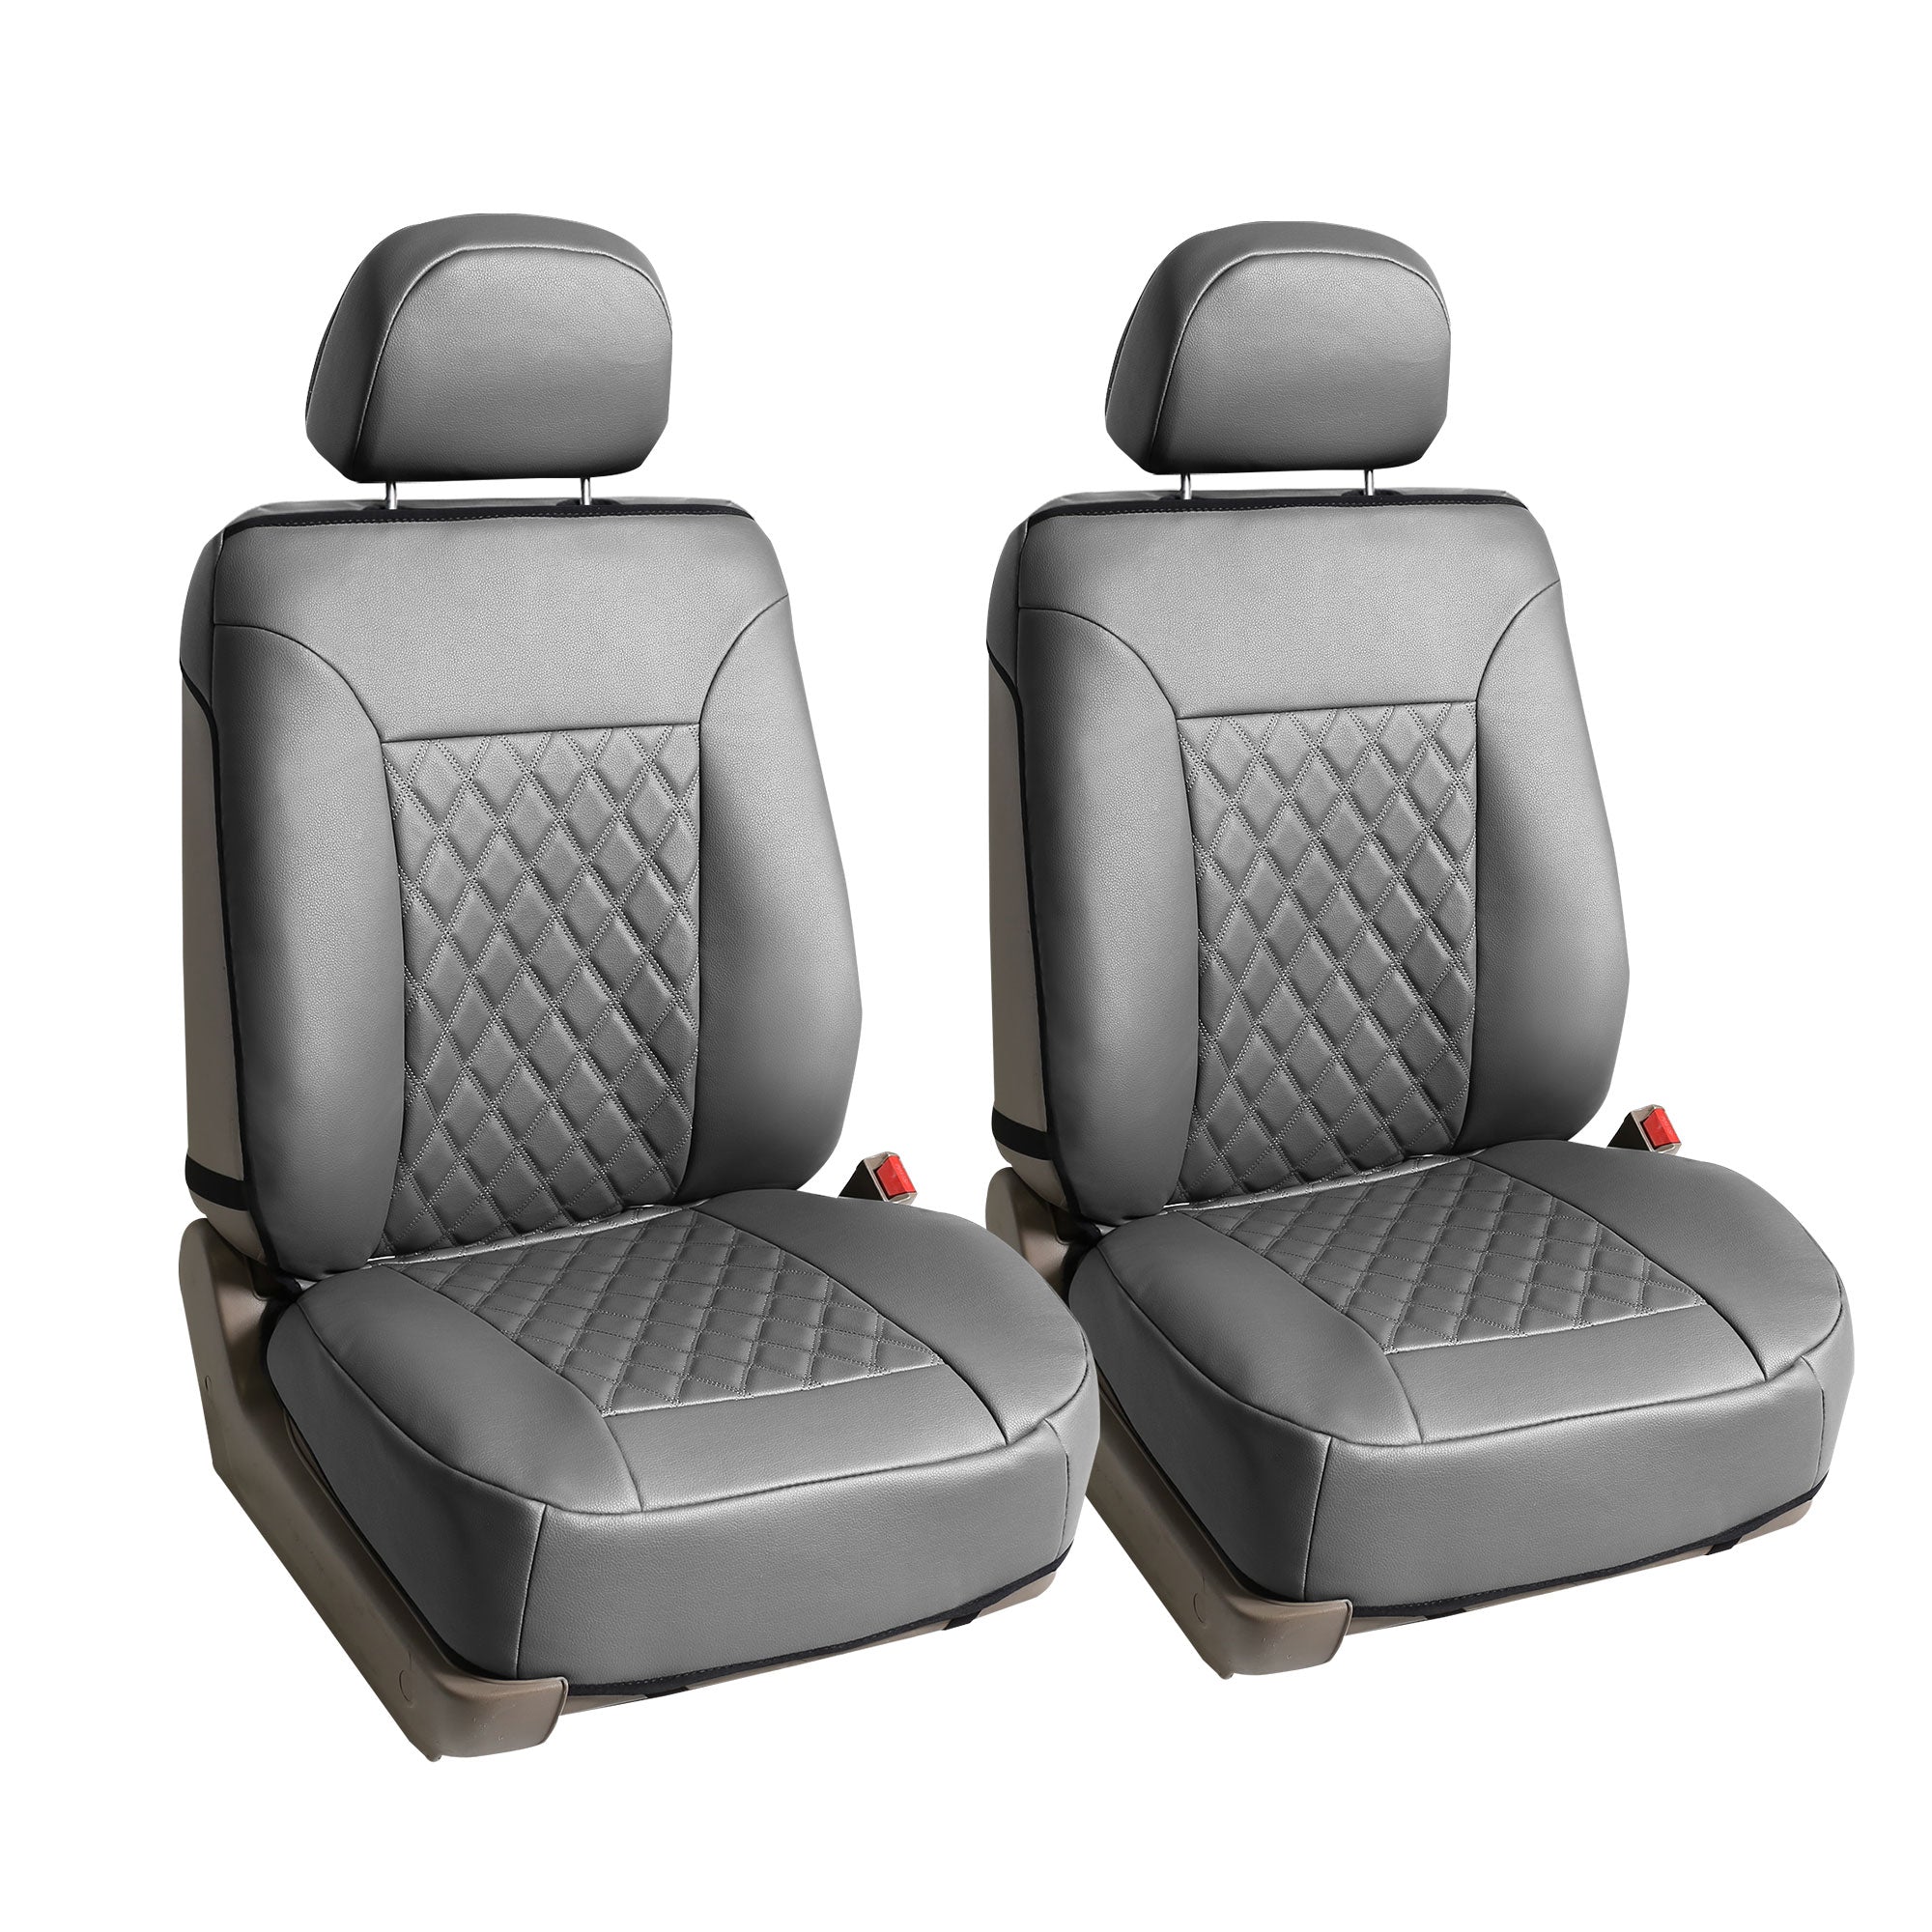 Deluxe Faux Leather Diamond Pattern Car Seat Cushions - Front Set Solid Gray